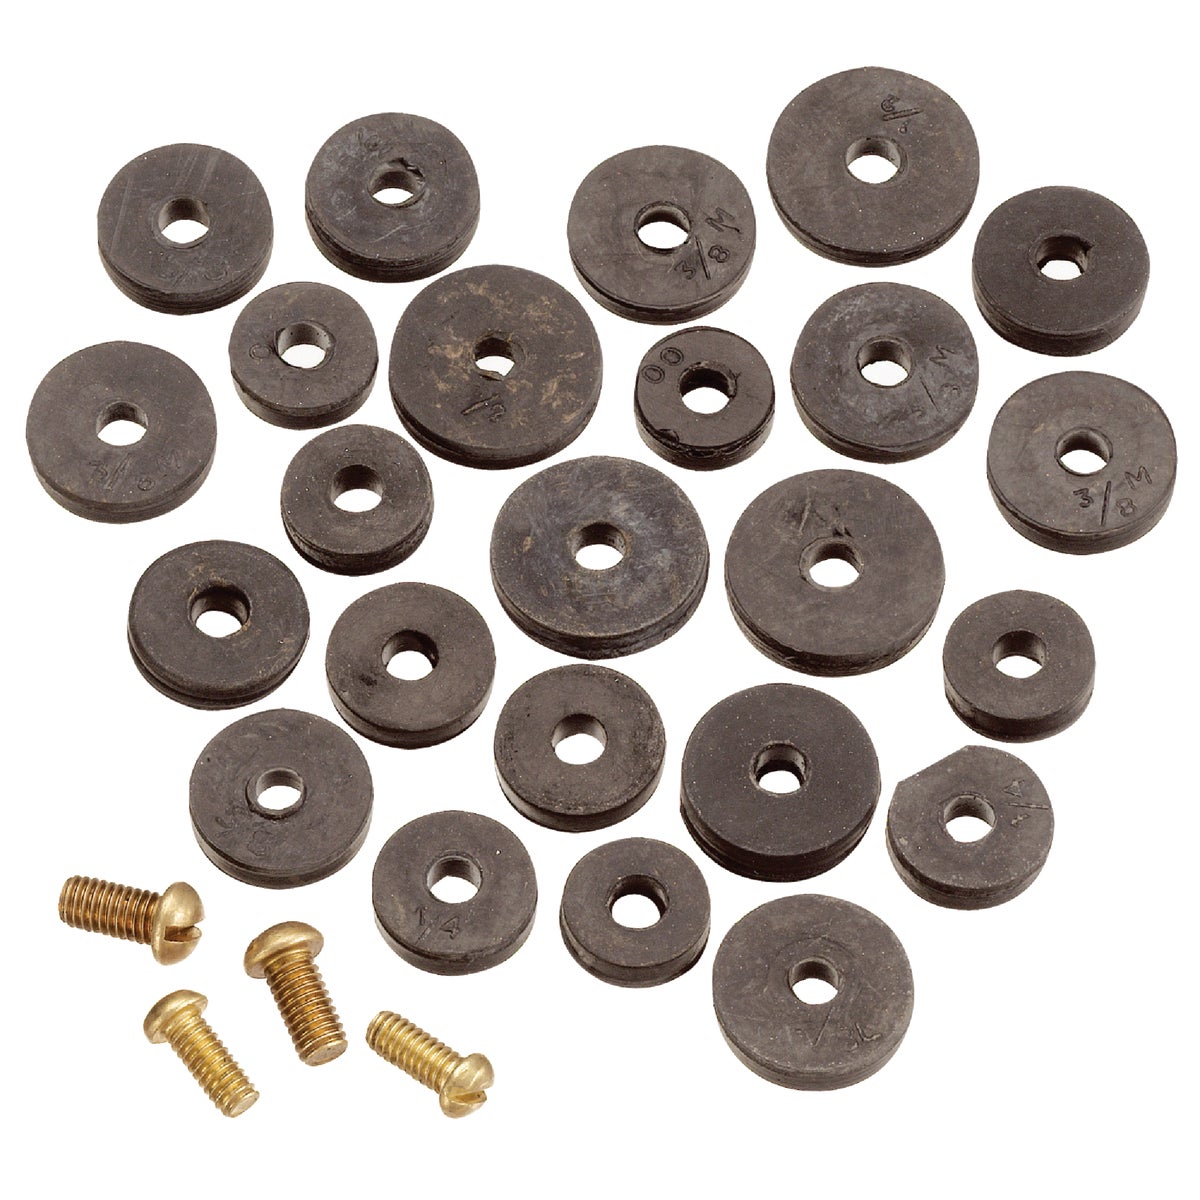 Item 426943, 20 flat faucet washers of assorted sizes, and 4 brass screws.